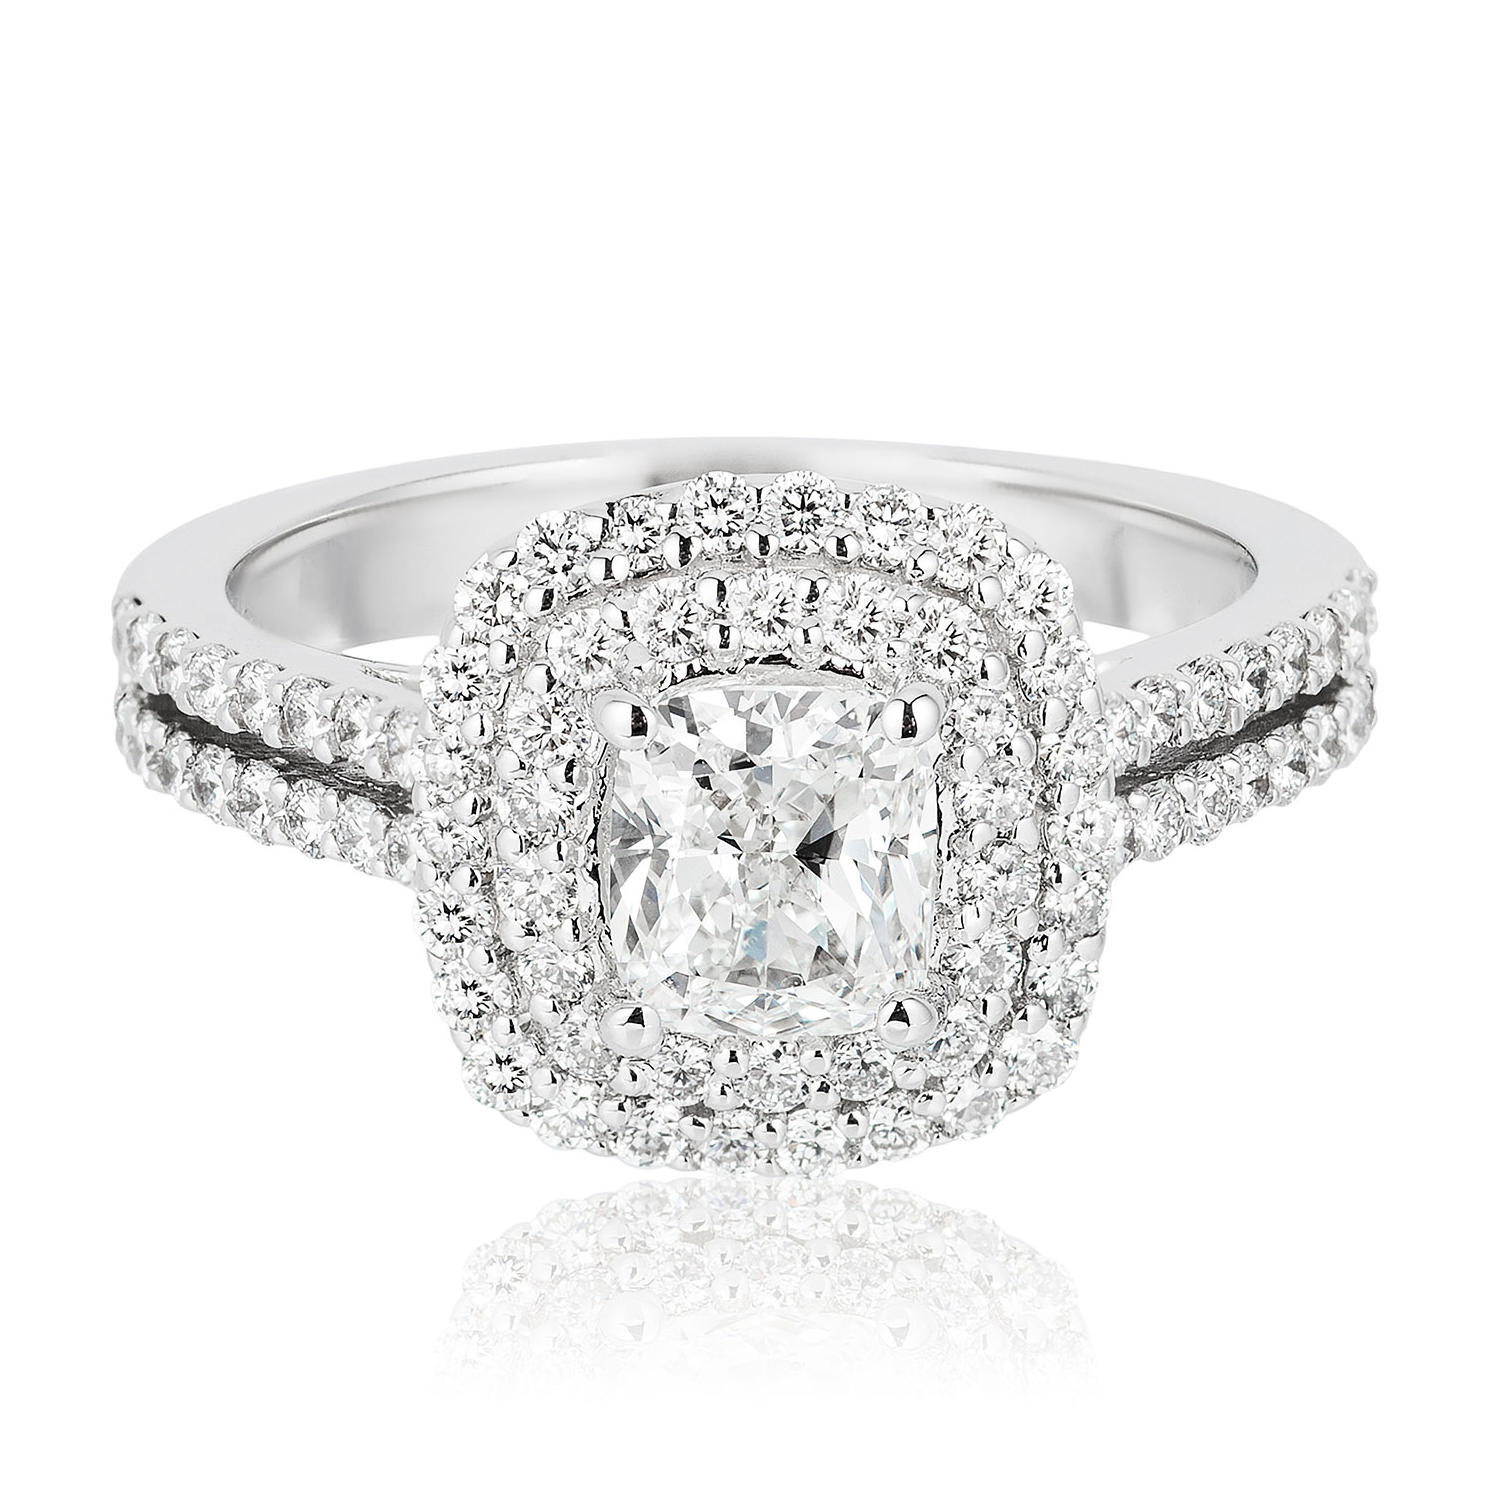 Superior Quality Collection 1.73 CT. T.W. Cushion Shaped Diamond Engagement Ring in 18K White Gold (I, VS2) 9